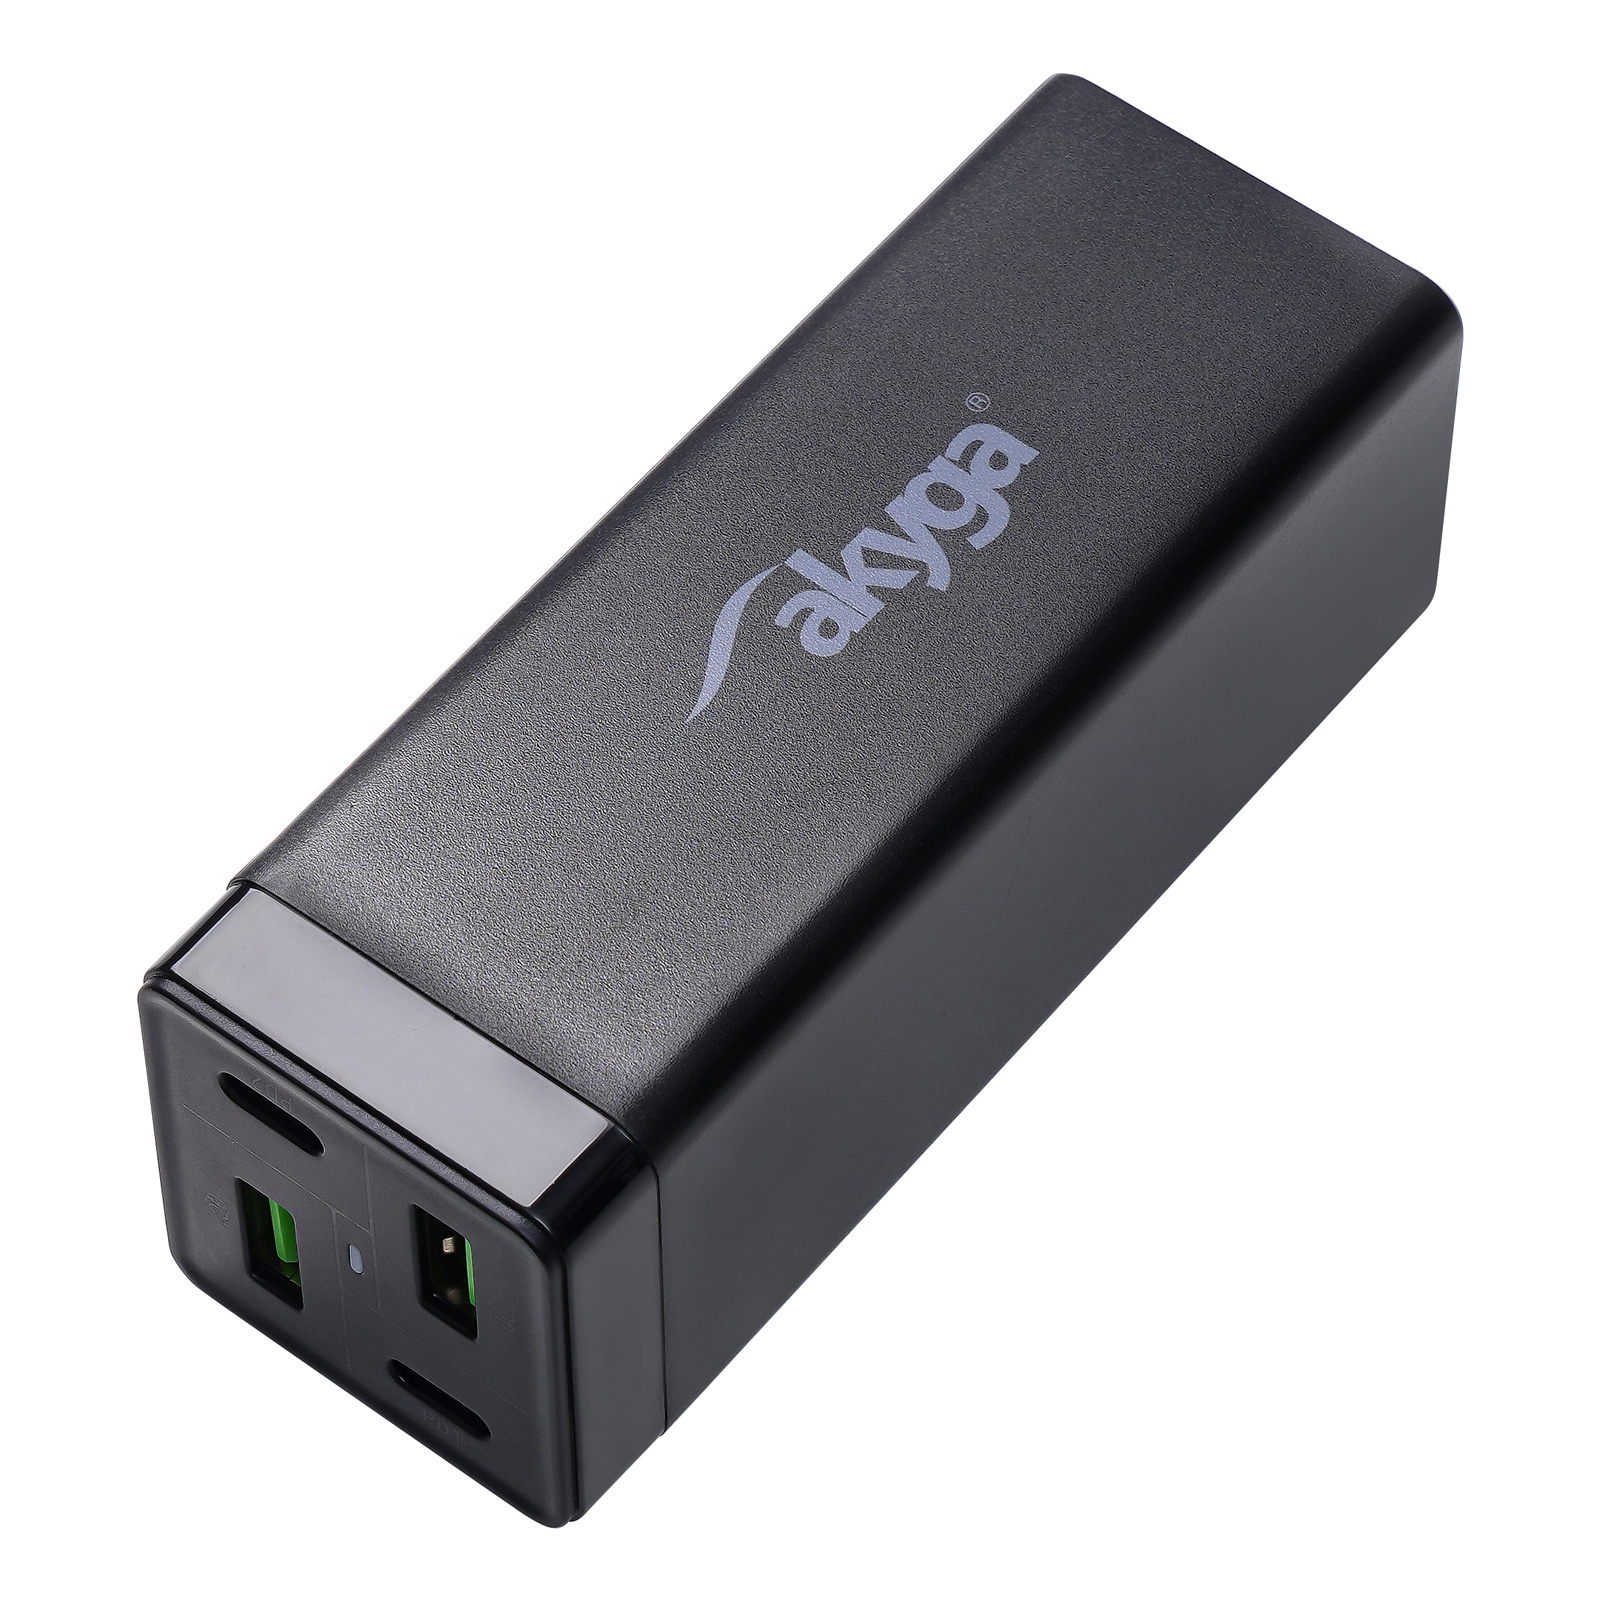 Main image USB Charger AK-CH-17 2x USB-A + 2x USB-C PD 5-20 V / max 3.25A 65W Quick Charge 4+